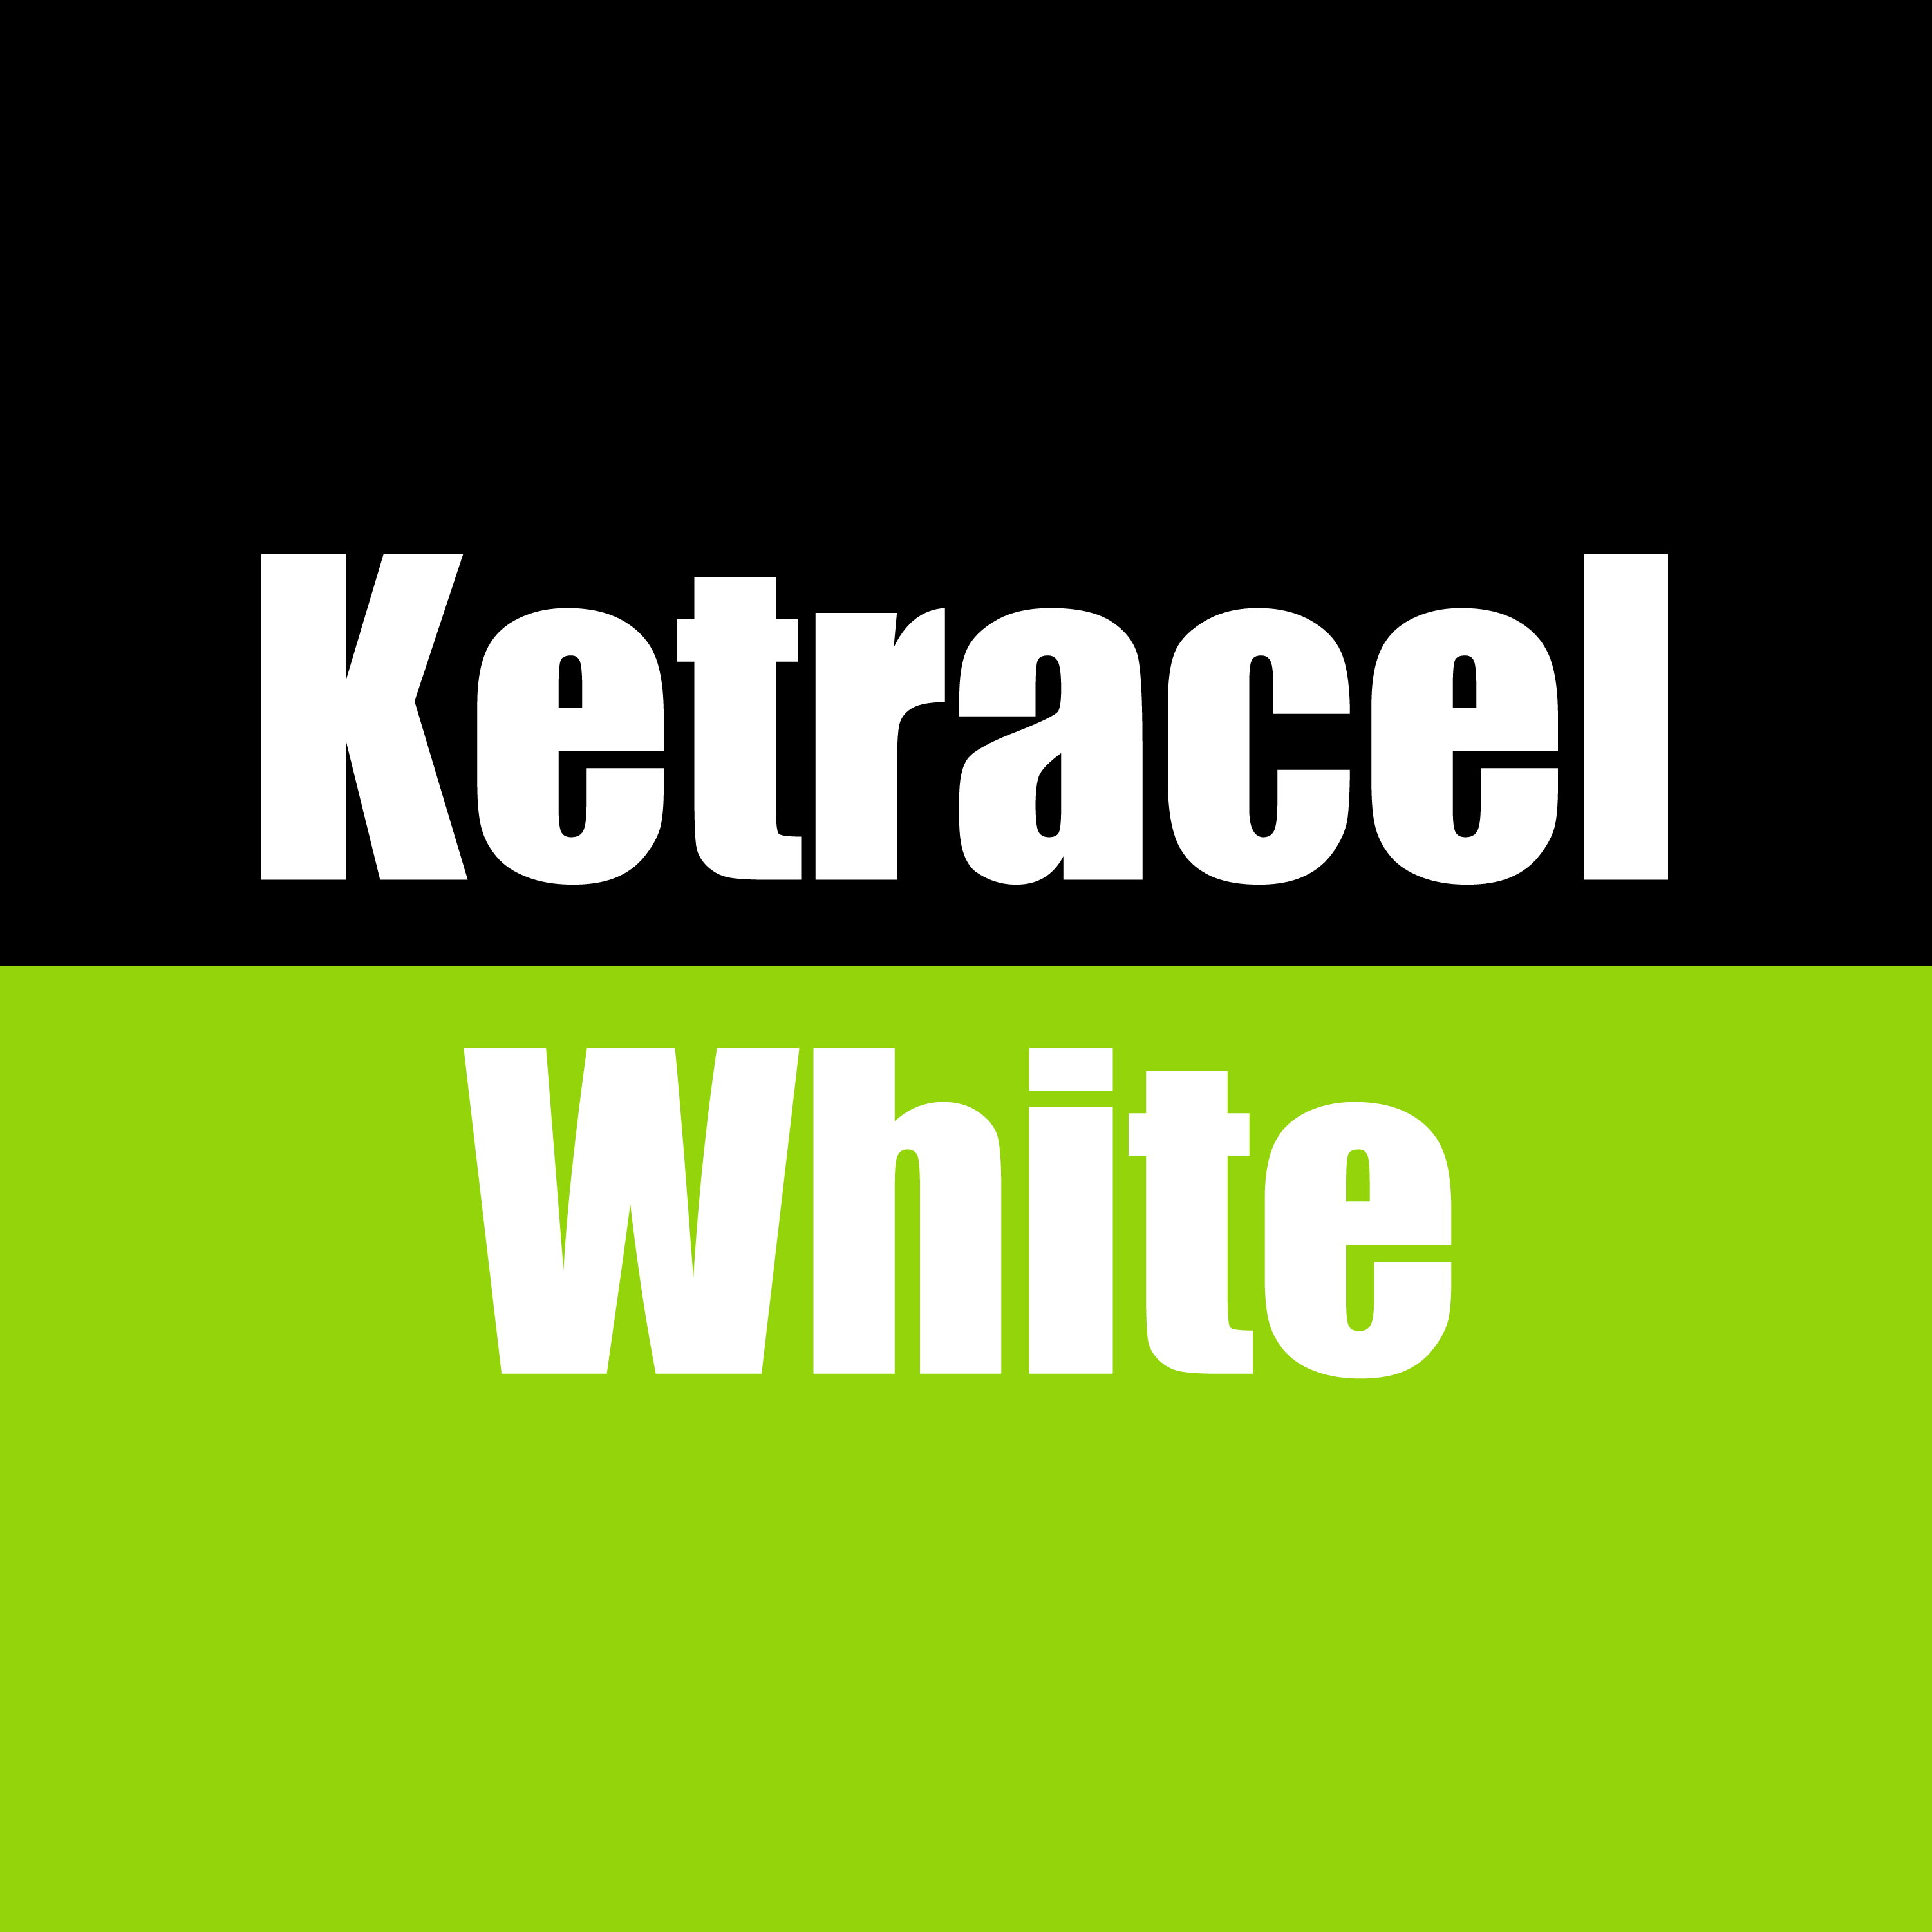 Club Image for KETRACEL WHITE